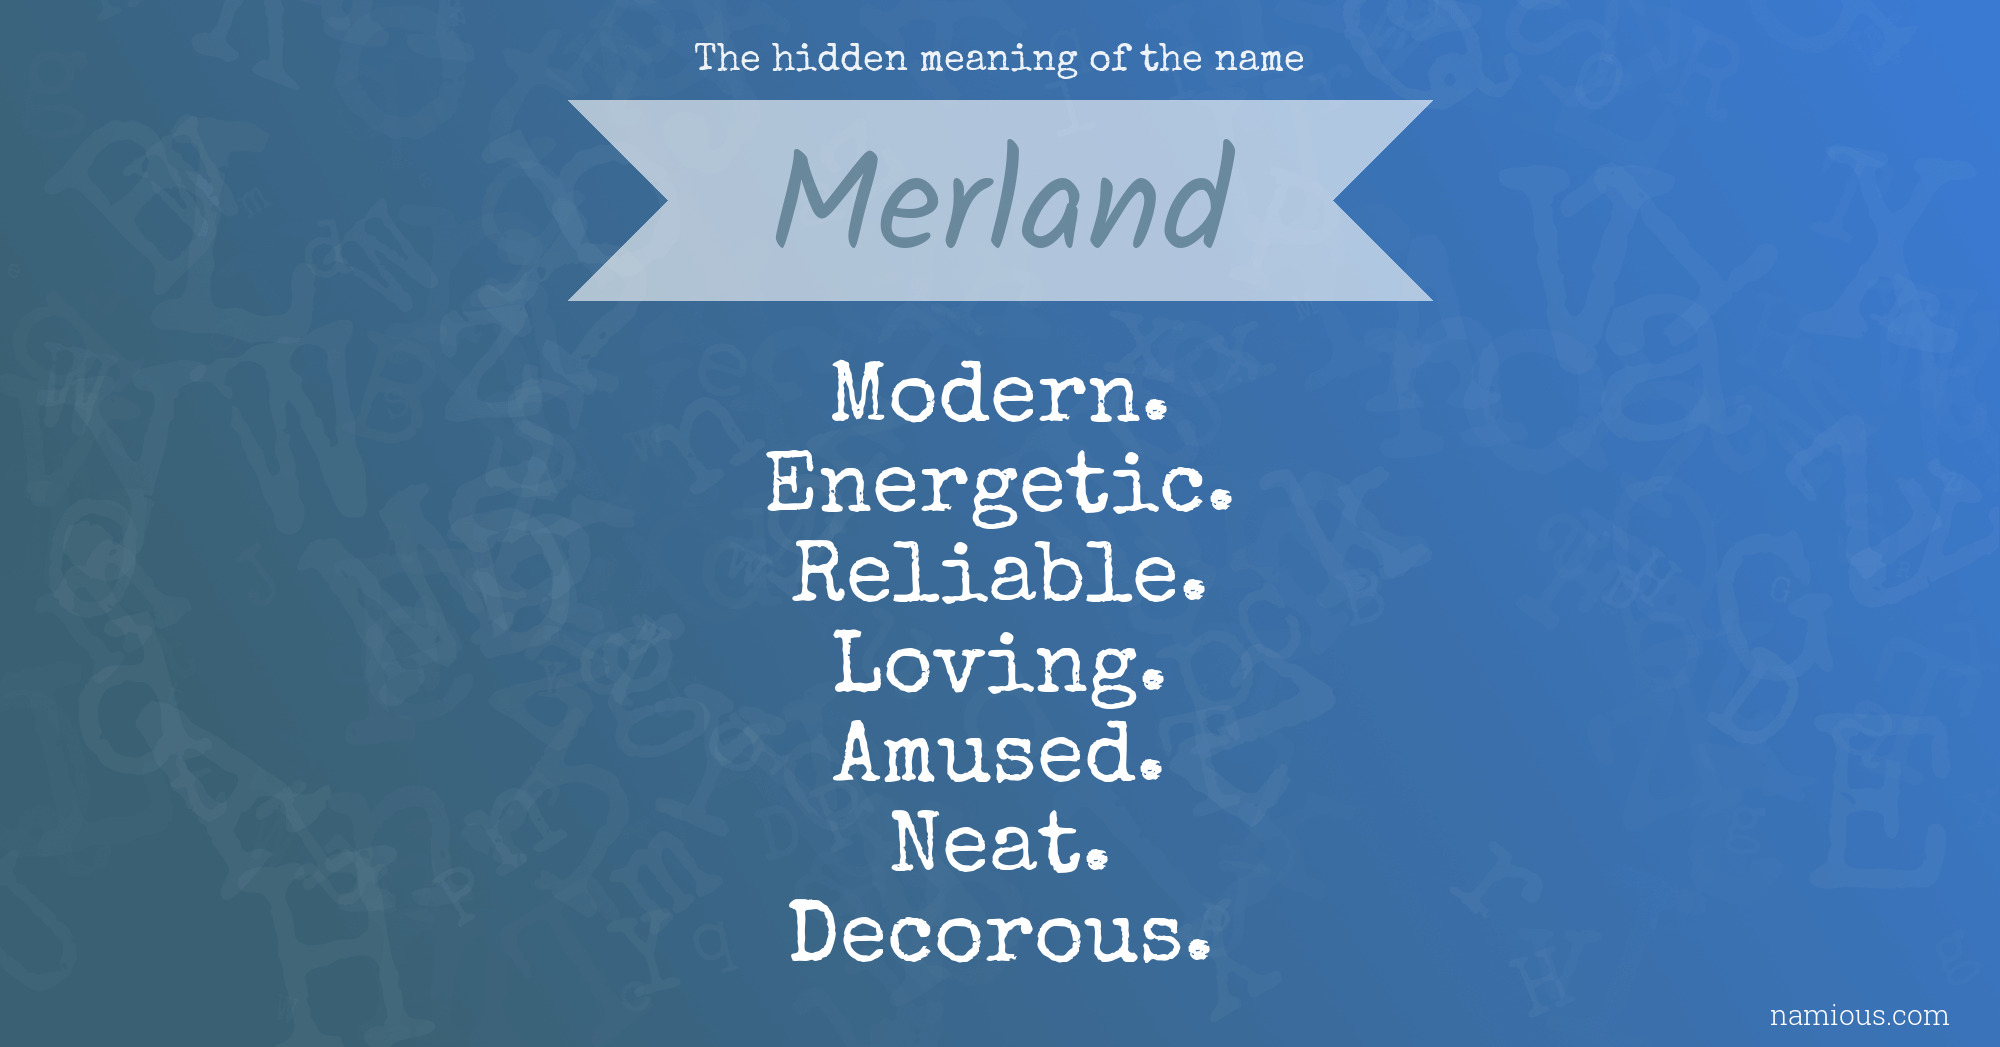 The hidden meaning of the name Merland